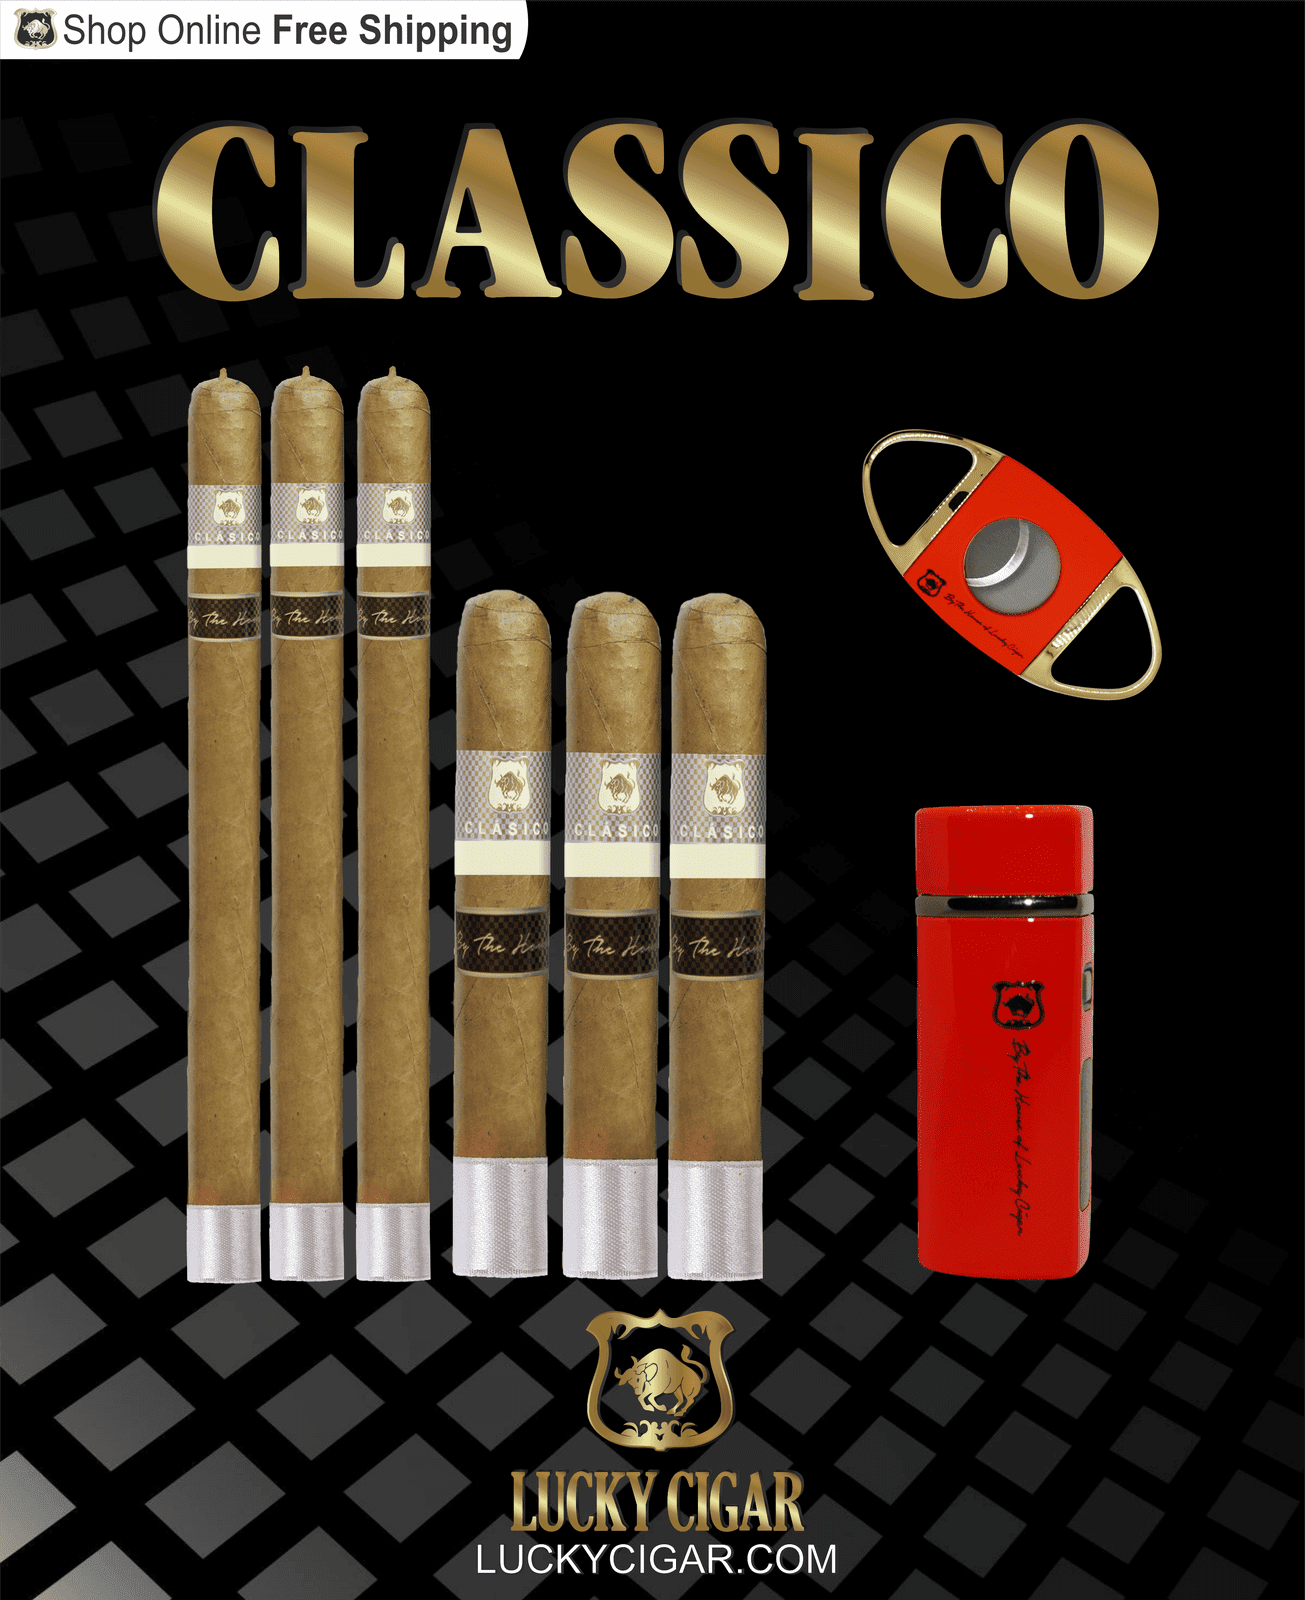 Lucky Cigar Sampler Sets: Set of 6 Classico Lancero, Robusto Cigars with Torch, Cutter